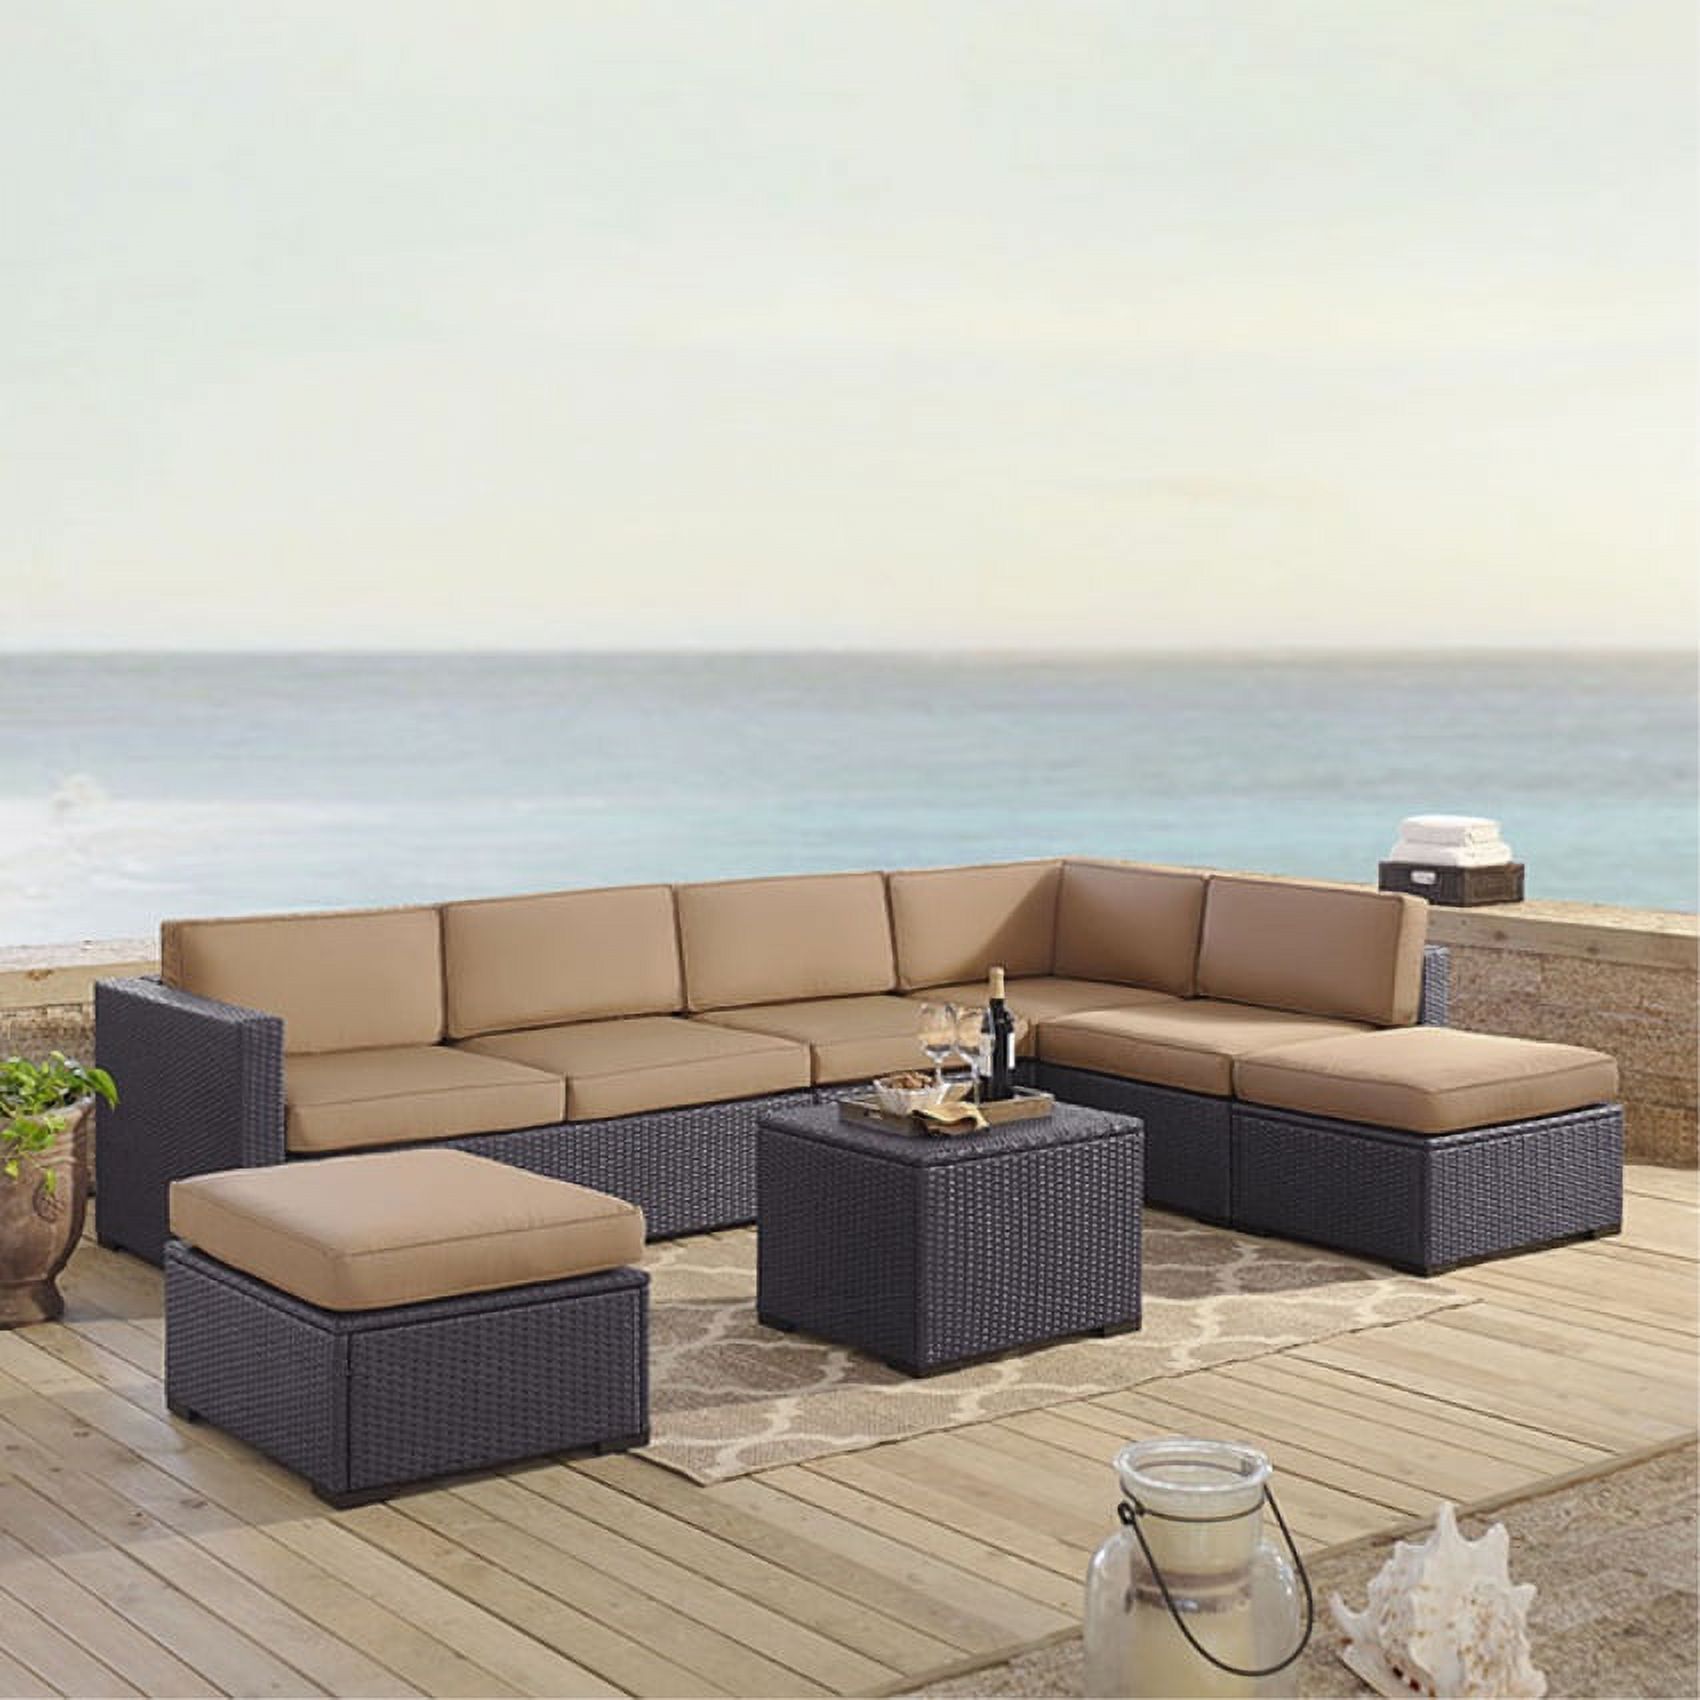 BISCAYNE 7 PERSON OUTDOOR WICKER SEATING SET IN MOCHA - TWO LOVESEATS, ONE ARMLESS CHAIR, COFFEE TABLE, TWO OTTOMANS - image 1 of 4